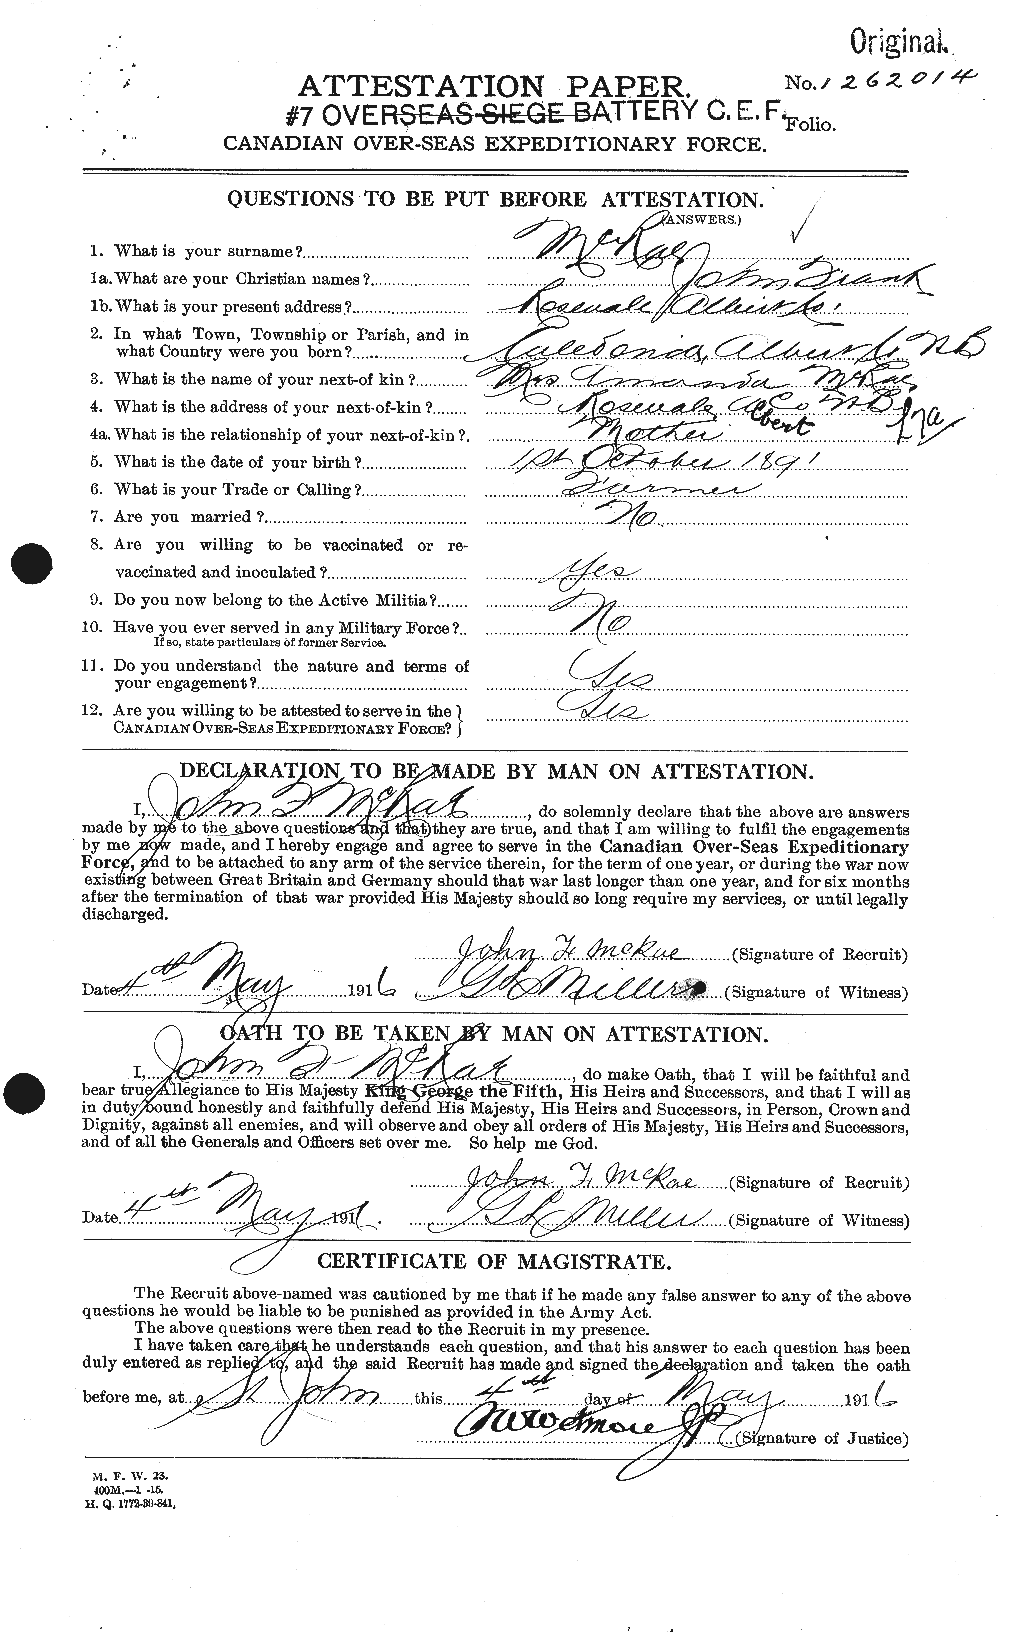 Personnel Records of the First World War - CEF 542839a